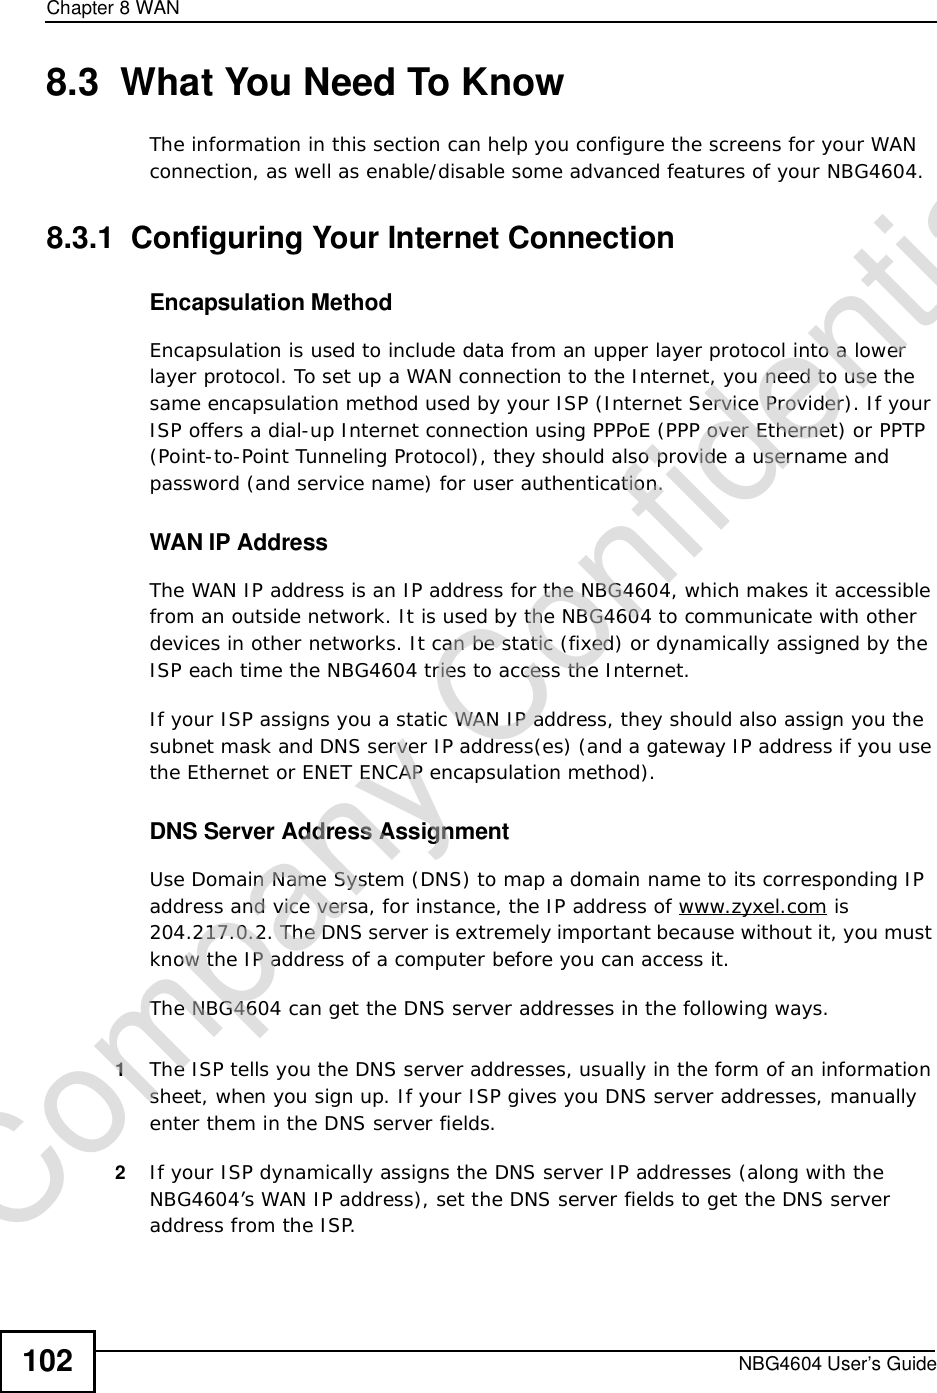 Chapter 8WANNBG4604 User’s Guide1028.3  What You Need To KnowThe information in this section can help you configure the screens for your WAN connection, as well as enable/disable some advanced features of your NBG4604.8.3.1  Configuring Your Internet ConnectionEncapsulation MethodEncapsulation is used to include data from an upper layer protocol into a lower layer protocol. To set up a WAN connection to the Internet, you need to use the same encapsulation method used by your ISP (Internet Service Provider). If your ISP offers a dial-up Internet connection using PPPoE (PPP over Ethernet) or PPTP (Point-to-Point Tunneling Protocol), they should also provide a username and password (and service name) for user authentication.WAN IP AddressThe WAN IP address is an IP address for the NBG4604, which makes it accessible from an outside network. It is used by the NBG4604 to communicate with other devices in other networks. It can be static (fixed) or dynamically assigned by the ISP each time the NBG4604 tries to access the Internet.If your ISP assigns you a static WAN IP address, they should also assign you the subnet mask and DNS server IP address(es) (and a gateway IP address if you use the Ethernet or ENET ENCAP encapsulation method).DNS Server Address AssignmentUse Domain Name System (DNS) to map a domain name to its corresponding IP address and vice versa, for instance, the IP address of www.zyxel.com is 204.217.0.2. The DNS server is extremely important because without it, you must know the IP address of a computer before you can access it. The NBG4604 can get the DNS server addresses in the following ways.1The ISP tells you the DNS server addresses, usually in the form of an information sheet, when you sign up. If your ISP gives you DNS server addresses, manually enter them in the DNS server fields.2If your ISP dynamically assigns the DNS server IP addresses (along with the NBG4604’s WAN IP address), set the DNS server fields to get the DNS server address from the ISP. Company Confidential